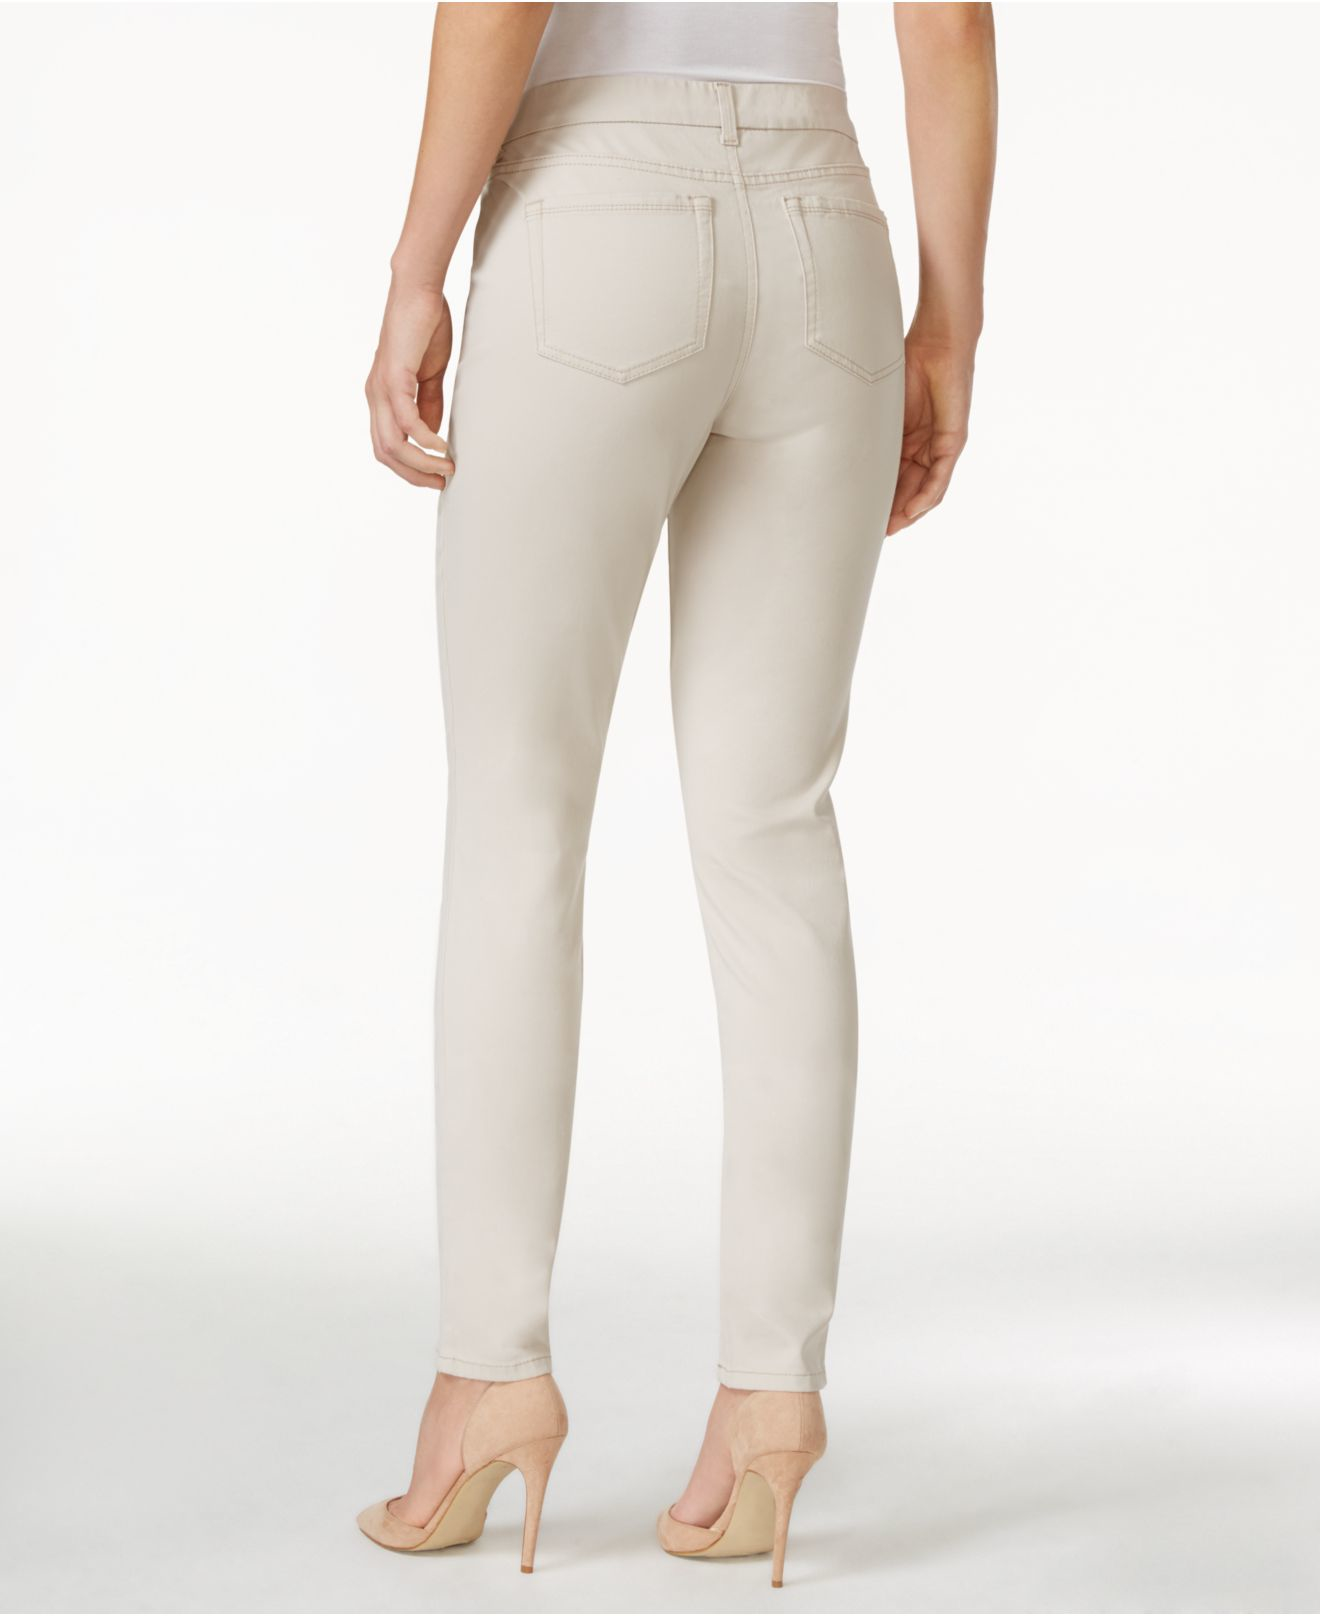 Lyst - Charter Club Colored Pull-on Skinny Jeans in White